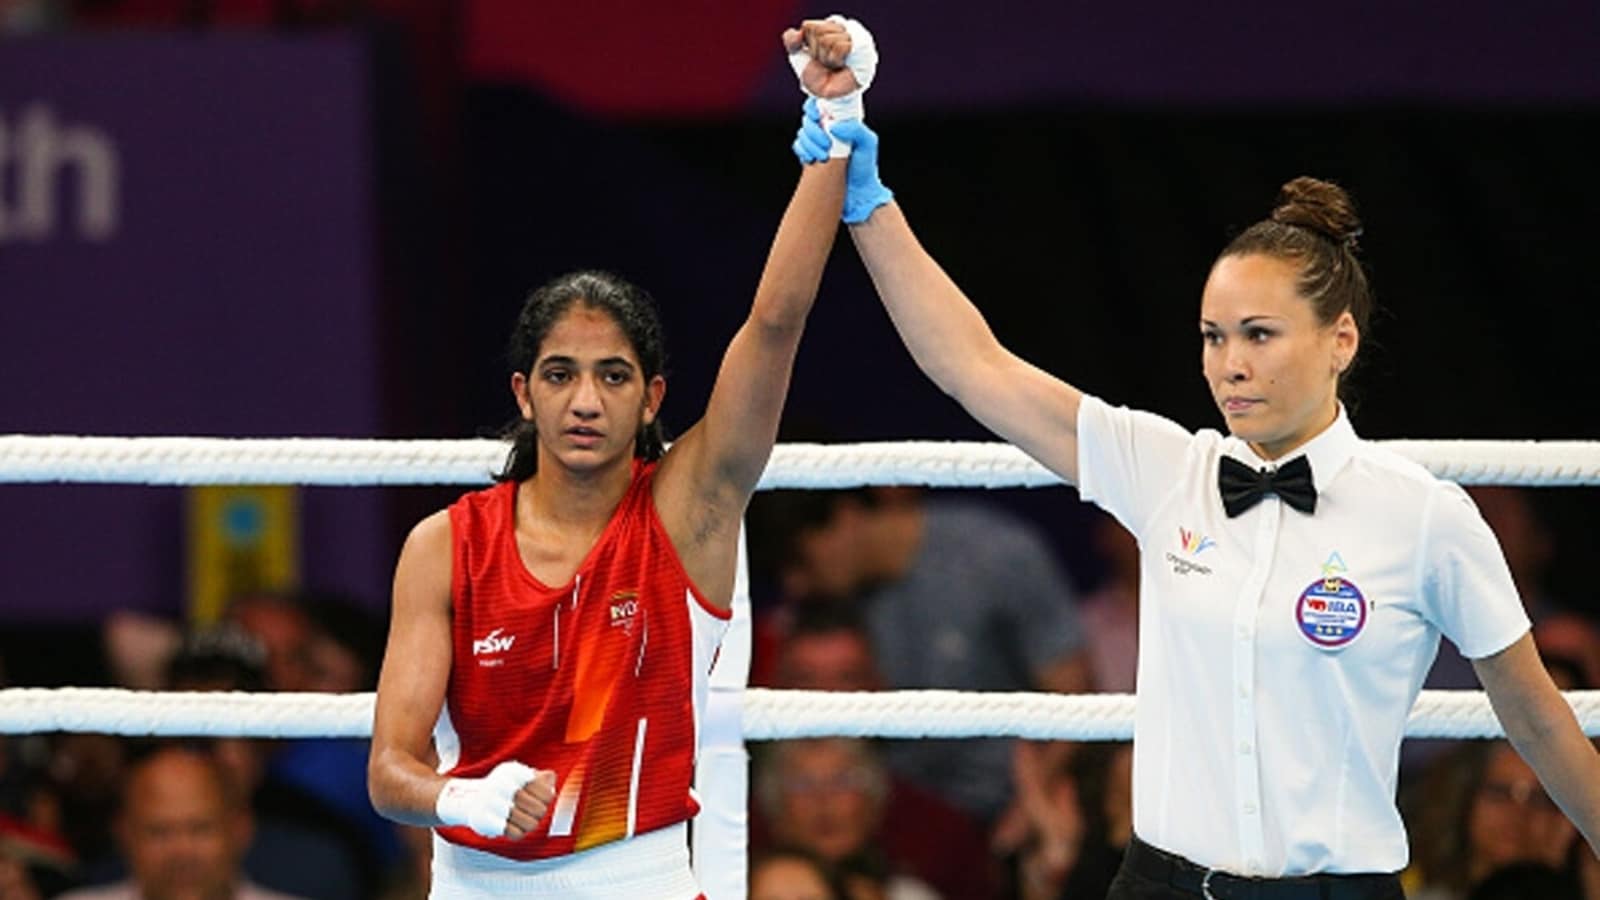 Nitu Ghanghas wins gold, opens India's medal account in boxing at CWG 2022  - Hindustan Times